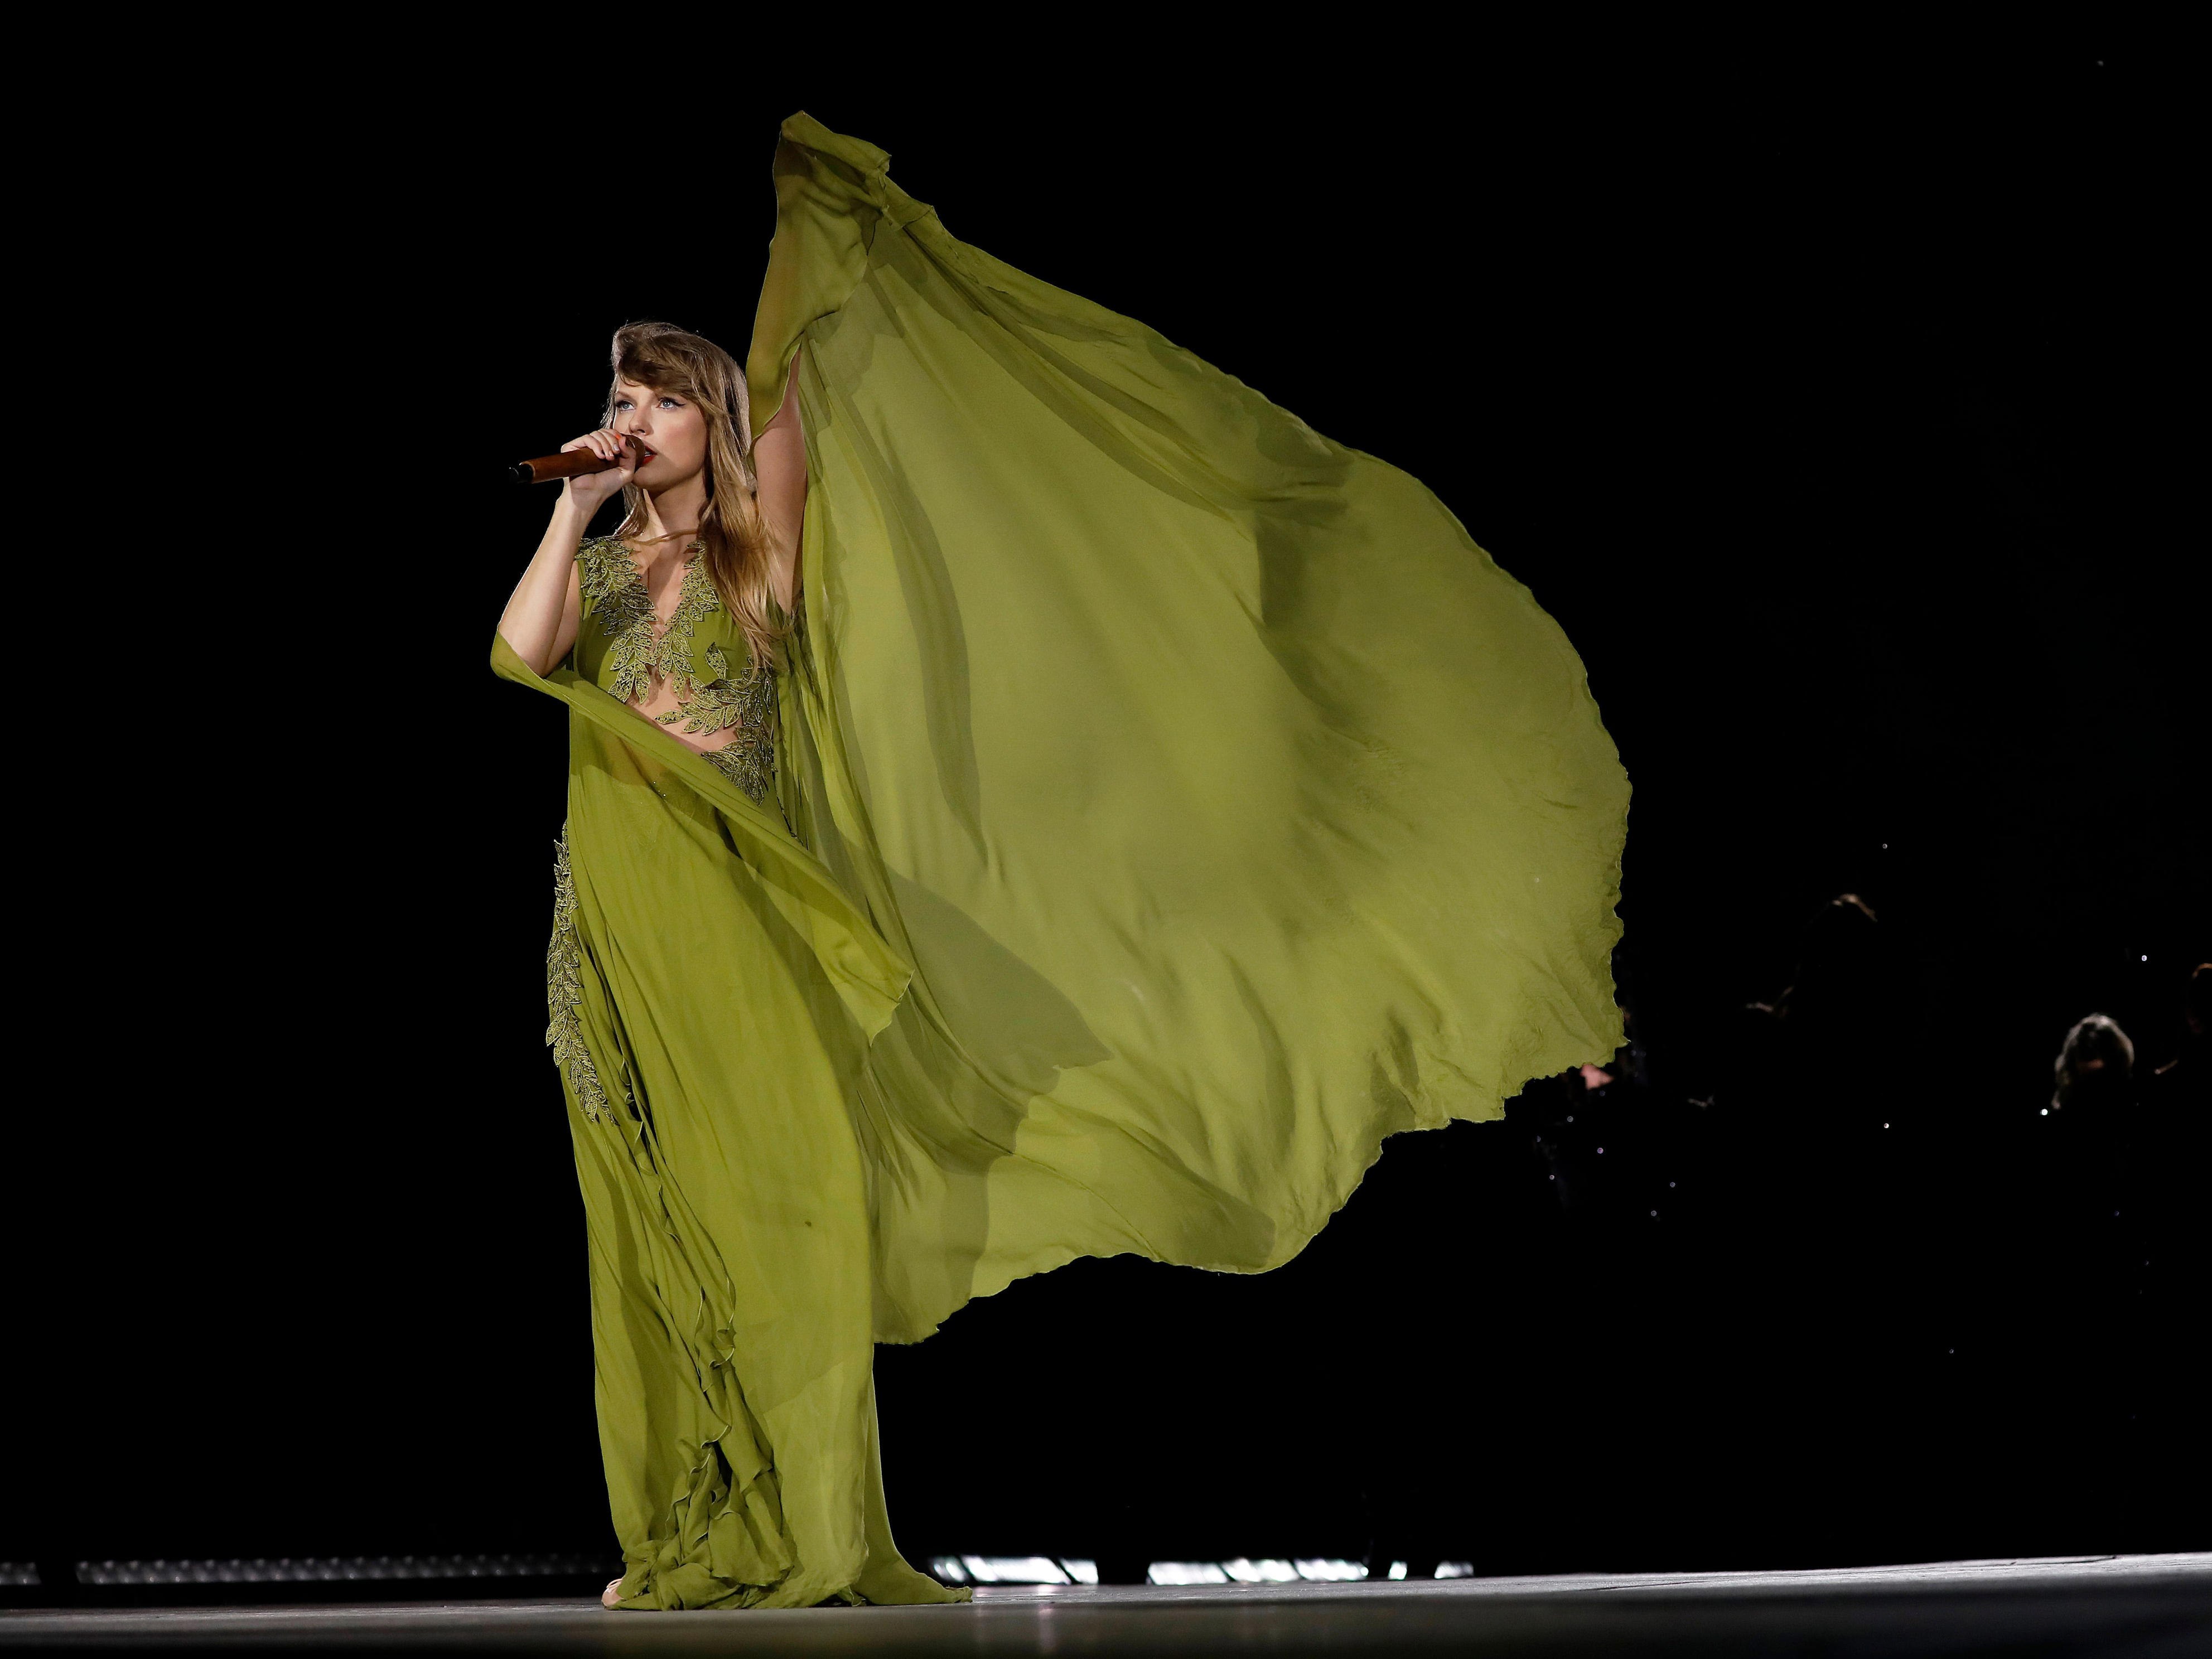 <p>Swift told the Pittsburgh crowd that she's always wanted to play "Seven" in her home state. The song includes the lyric, "But I, I was high in the sky / With Pennsylvania under me."</p>